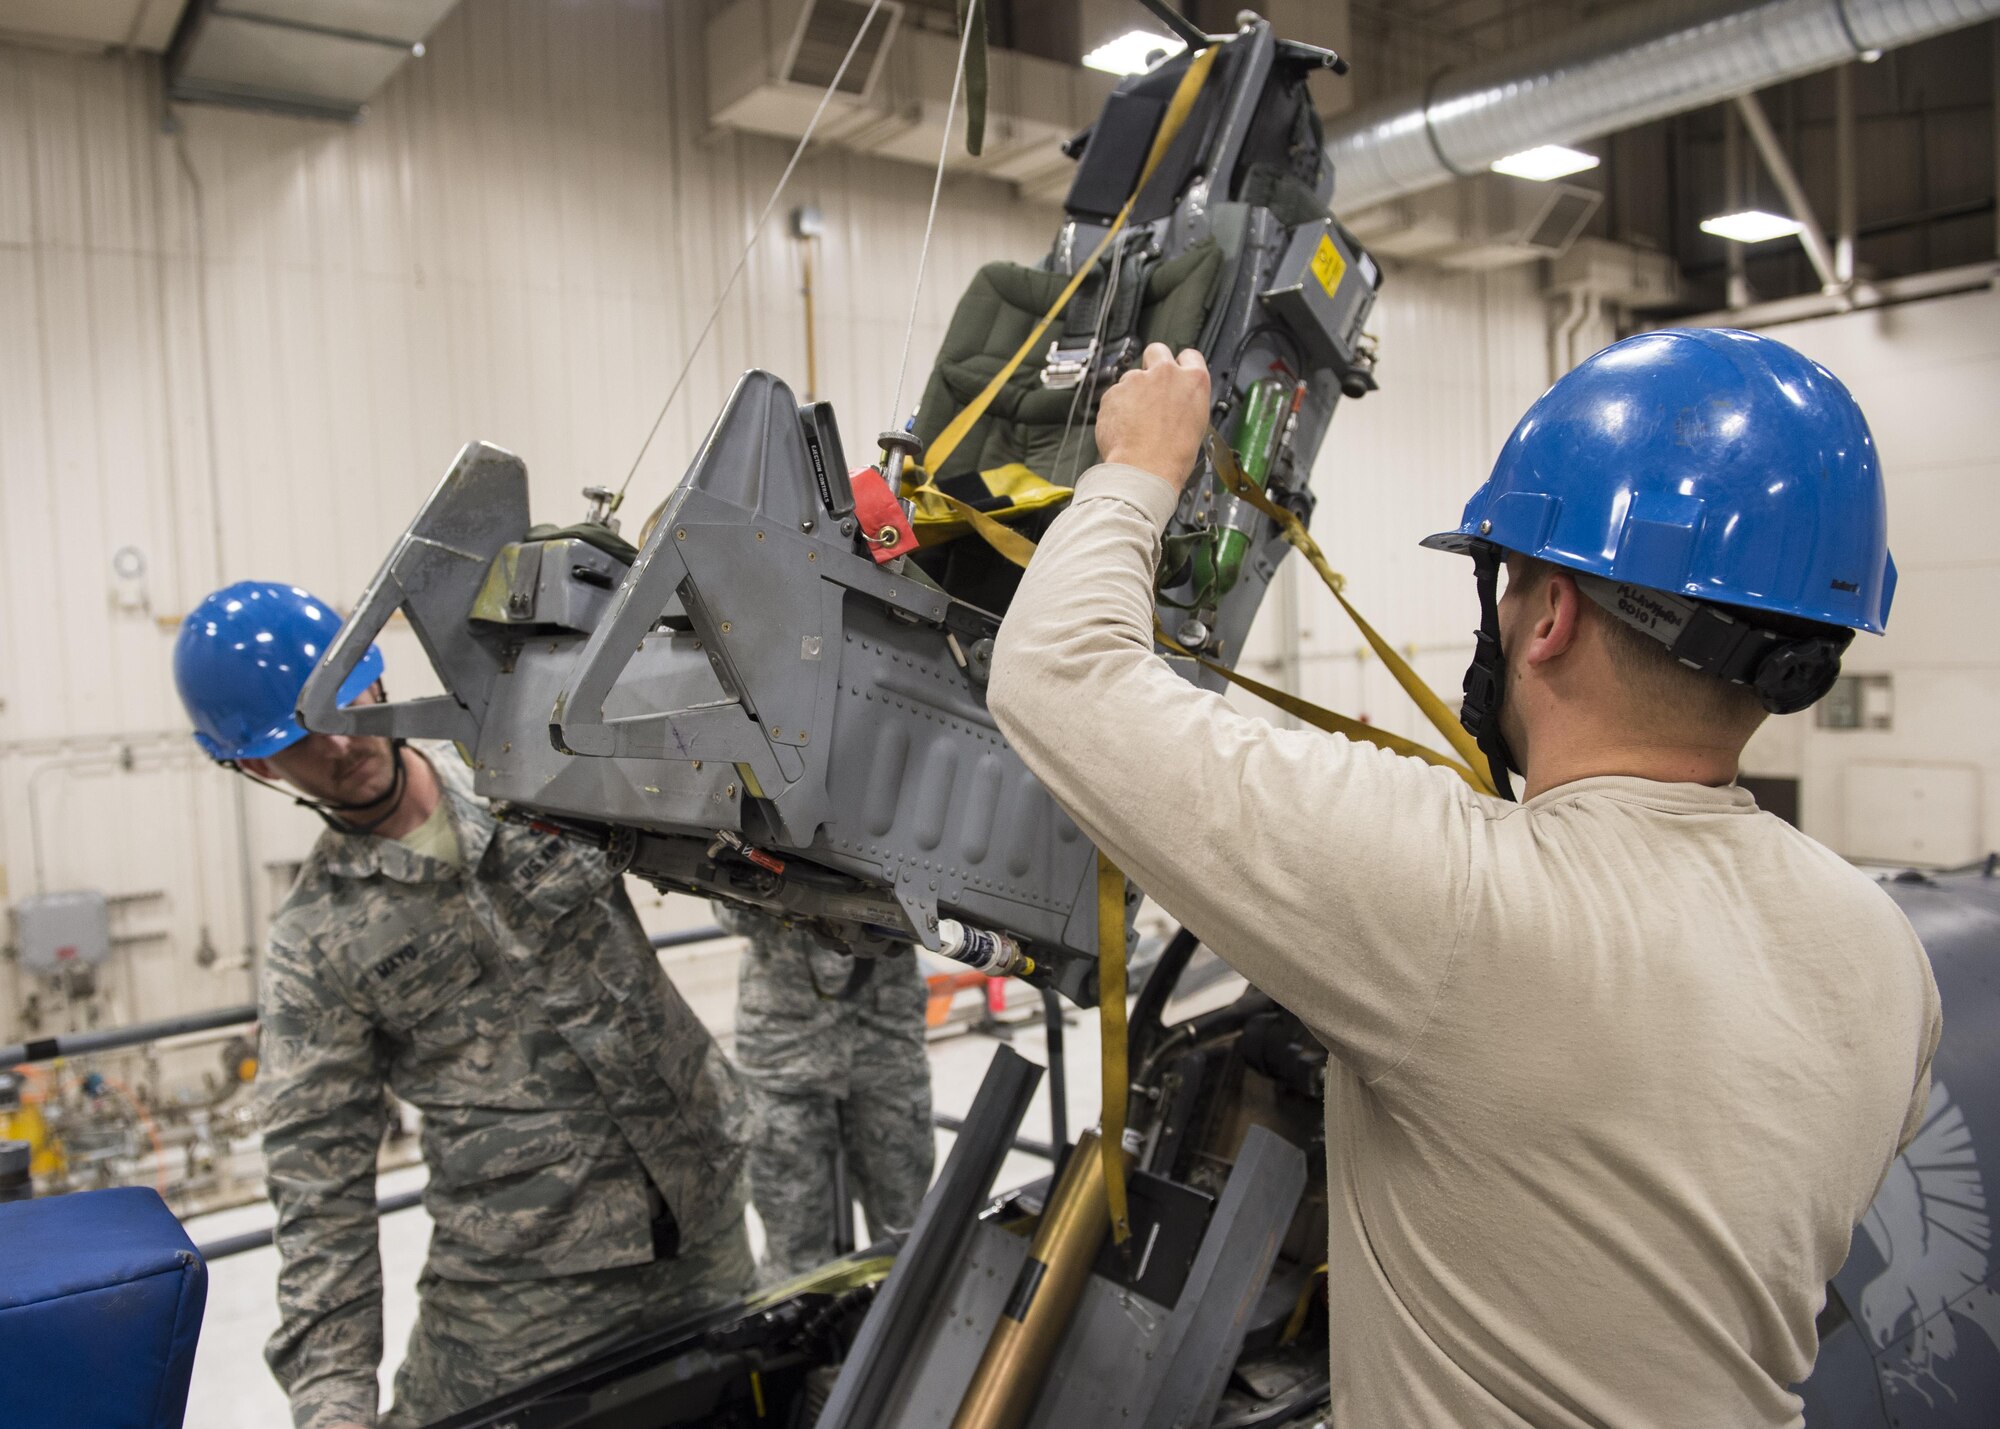 Tech. Sgt. Kevin Mayo (left), the 54th Maintenance Squadron egress section assistant Non-Commissioned Officer in Charge, and Staff Sgt. Mitchell Lawhorn (right), a 54th Maintenance Squadron egress systems Craftsman, remove an ejection seat from an F-16 Fighting Falcon on March 13, 2017 at Holloman Air Force Base, N.M. Egress system specialists ensure that pilots can safely eject from aircraft in the event of an emergency. They perform scheduled and unscheduled maintenance on seats, hatches, canopies and modules to ensure pilots can safely eject if necessary. (U.S. Air Force photo by Senior Airman Emily Kenney)